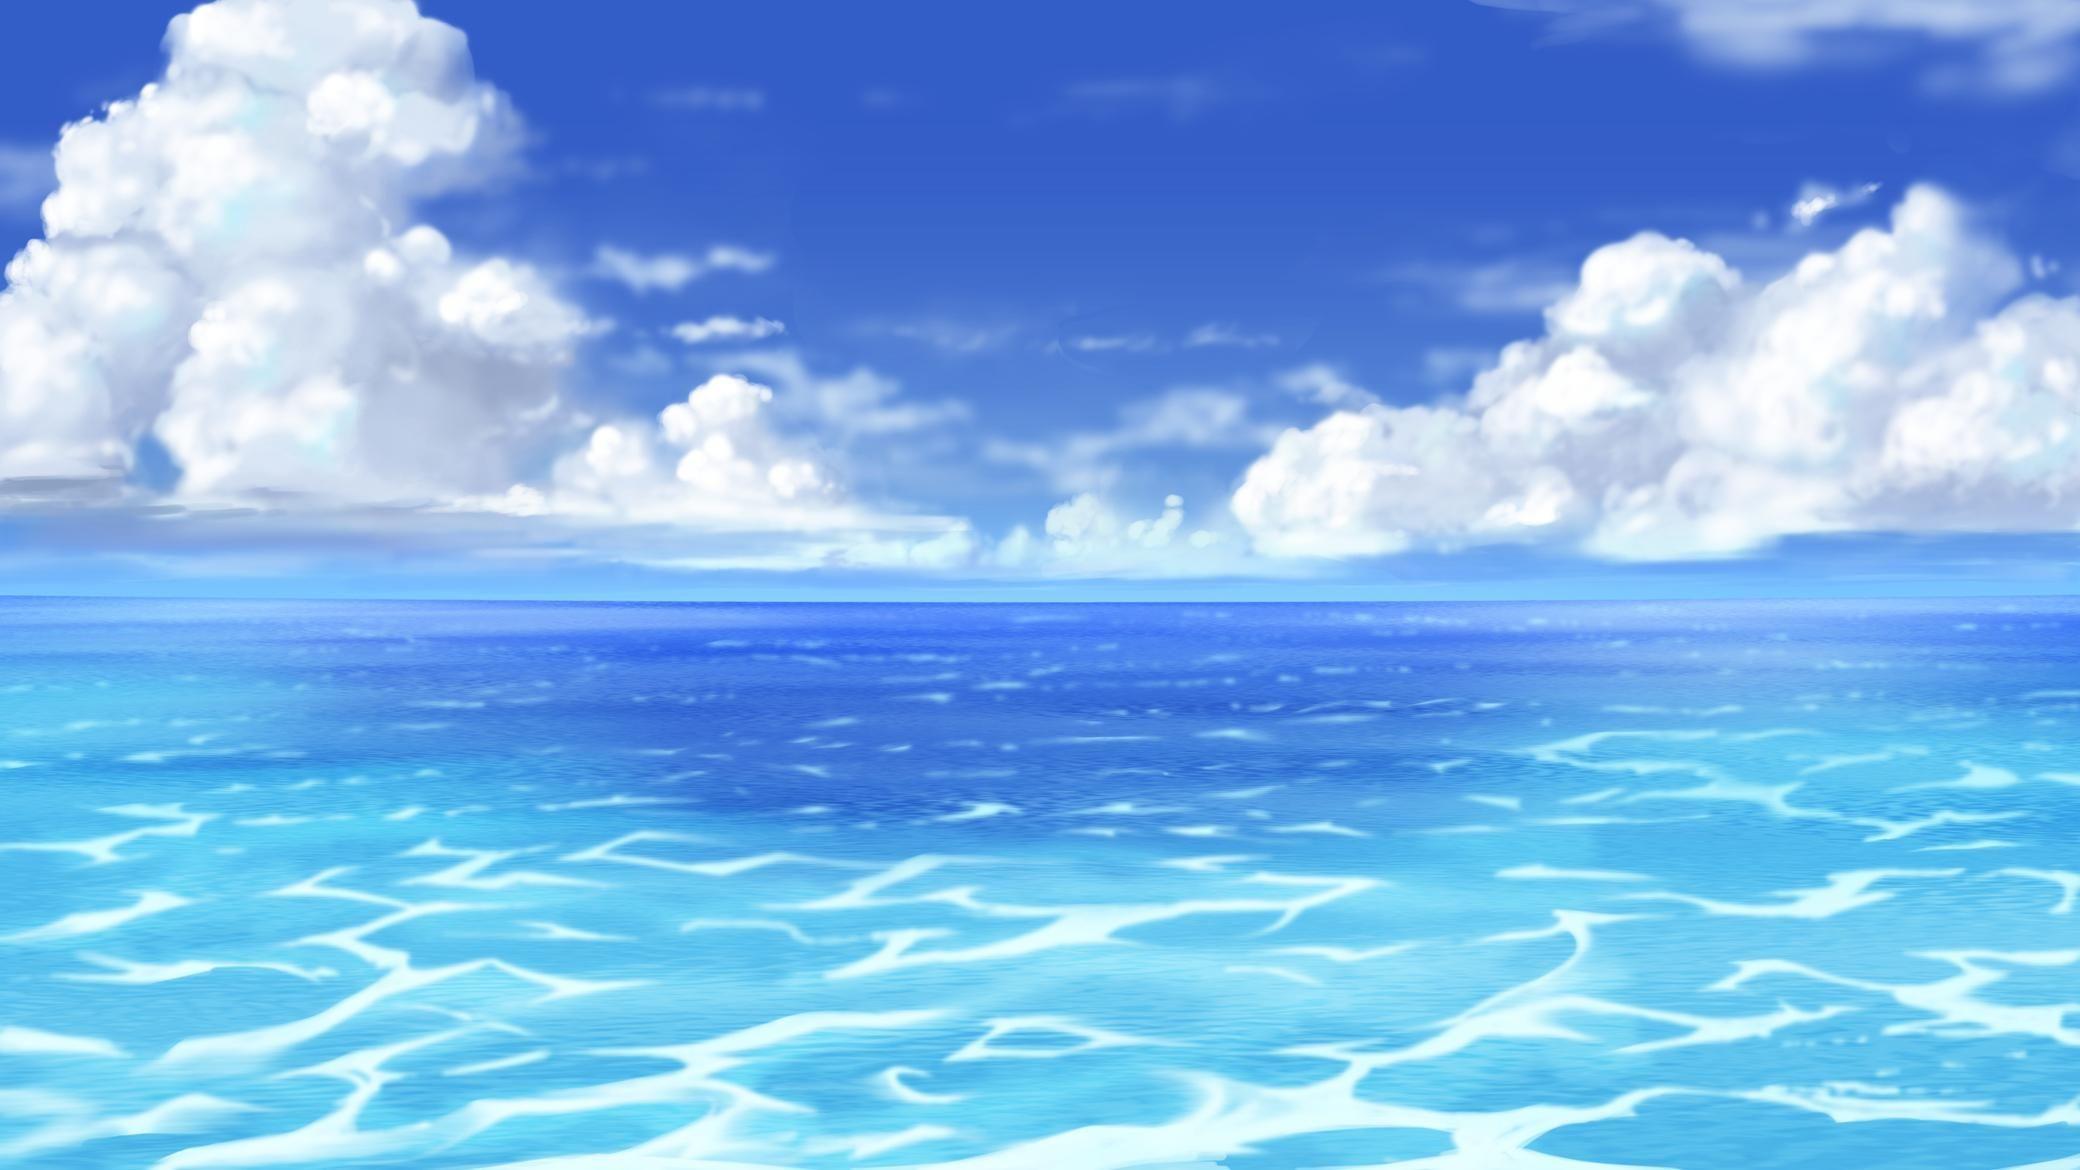 40 Anime Underwater HD Wallpapers and Backgrounds